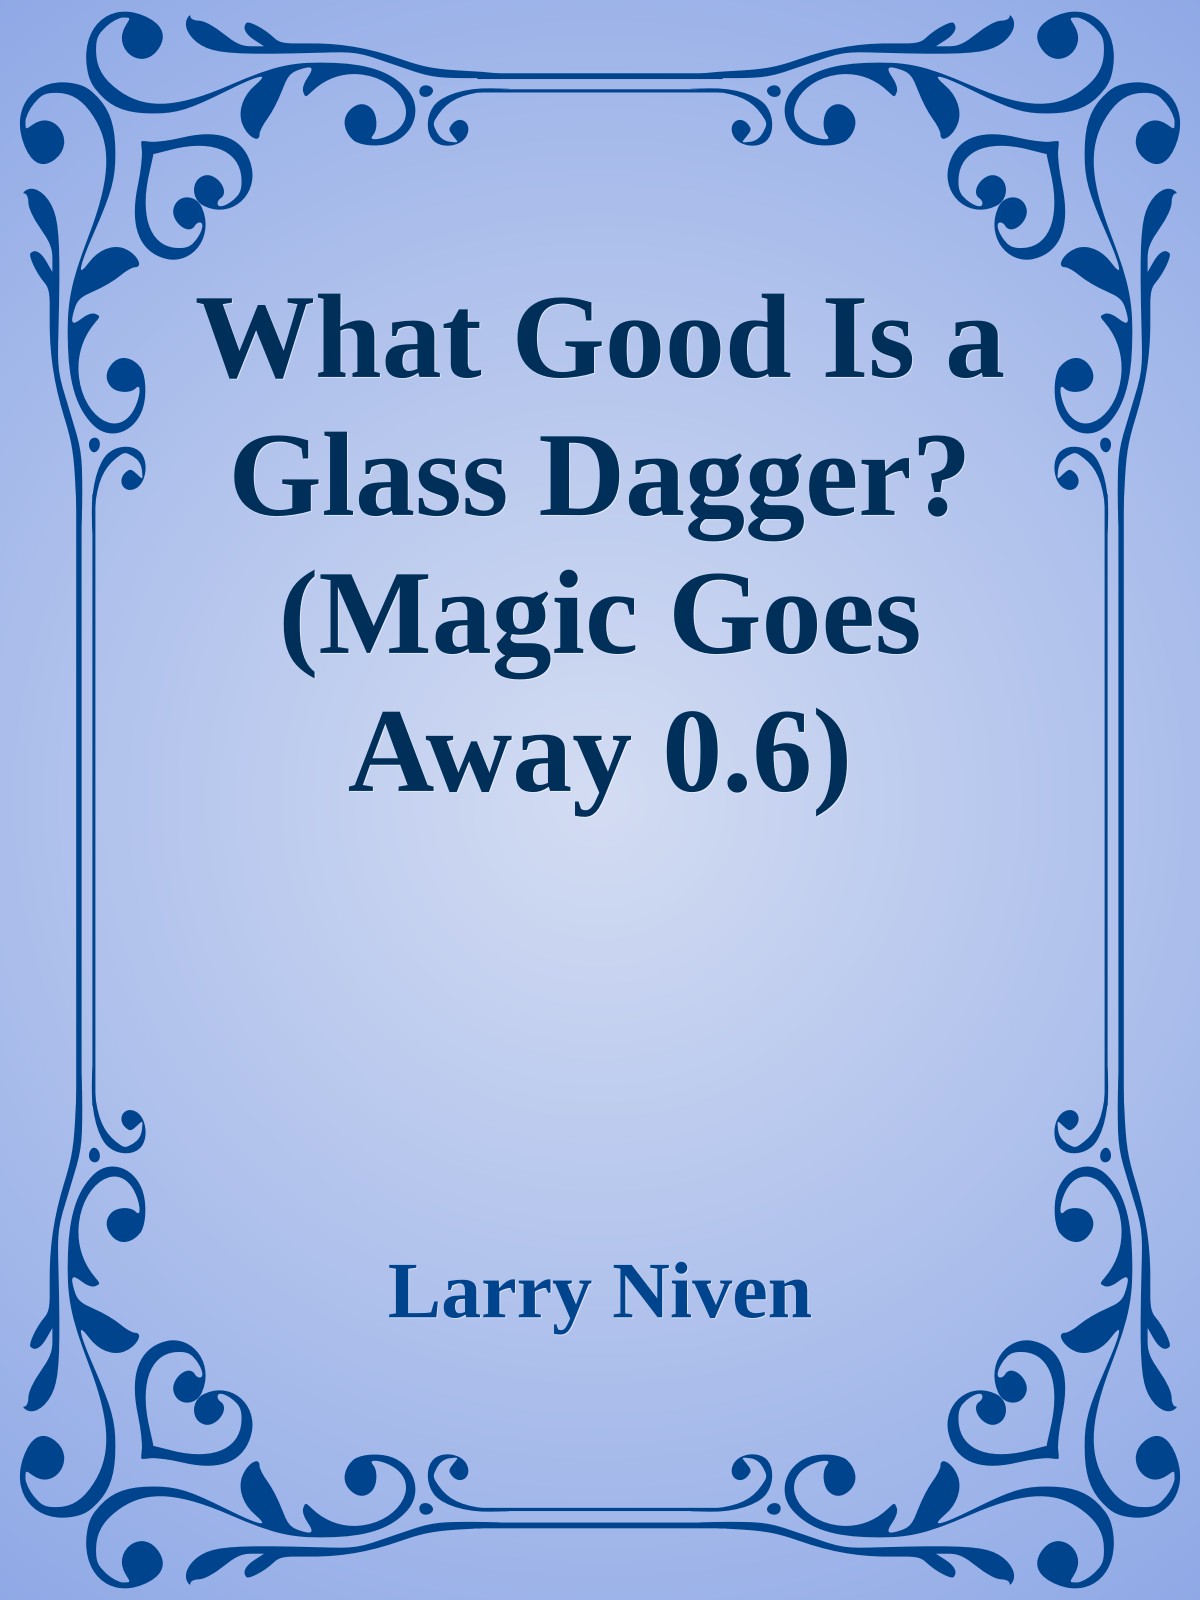 What Good Is a Glass Dagger?